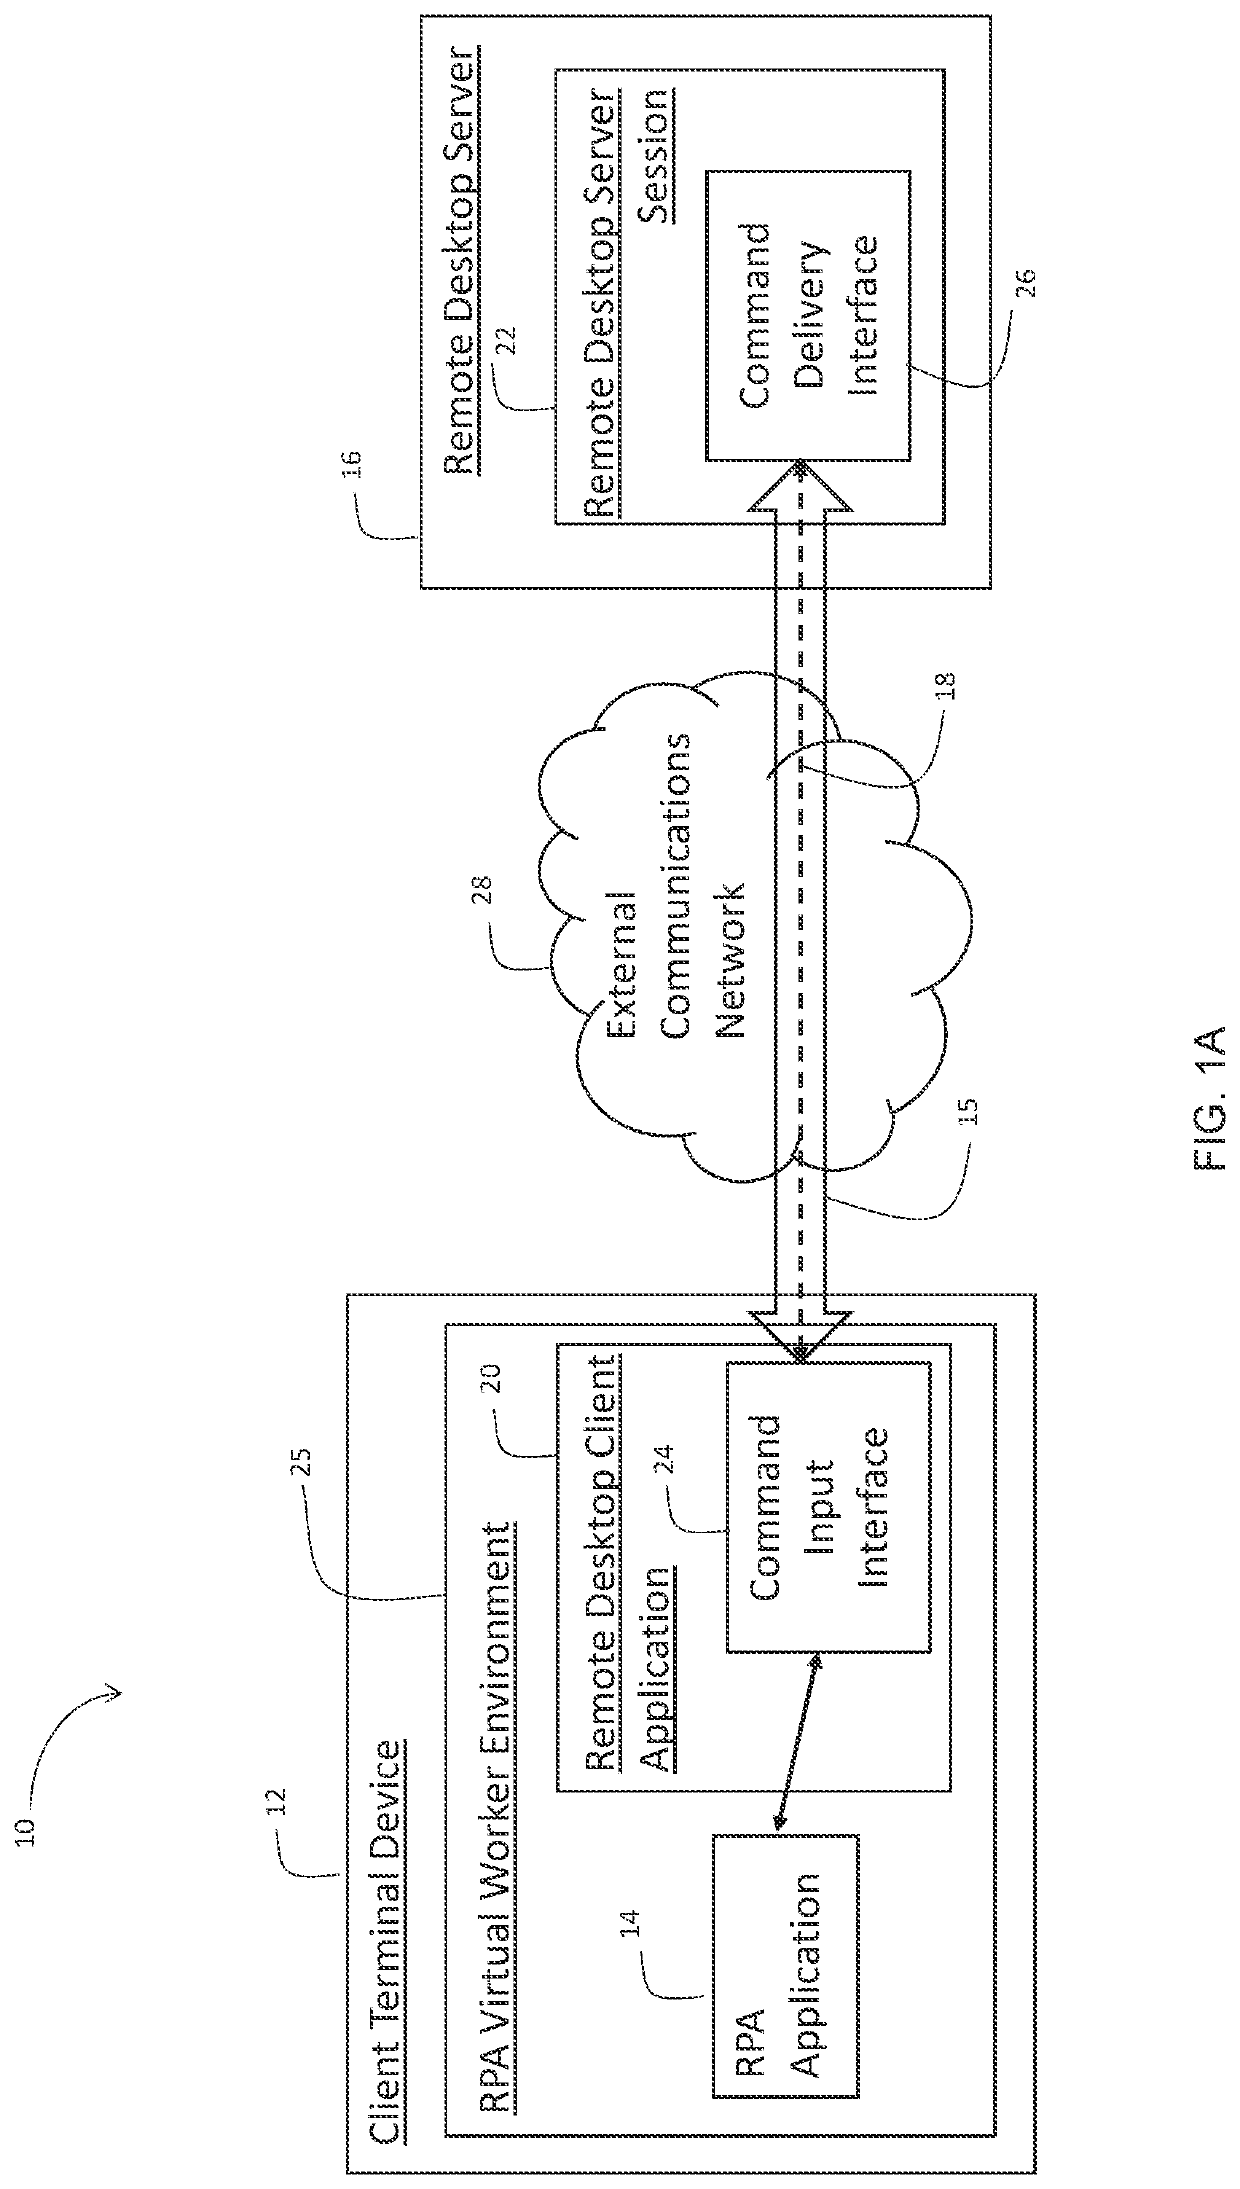 System and method for automated process orchestration